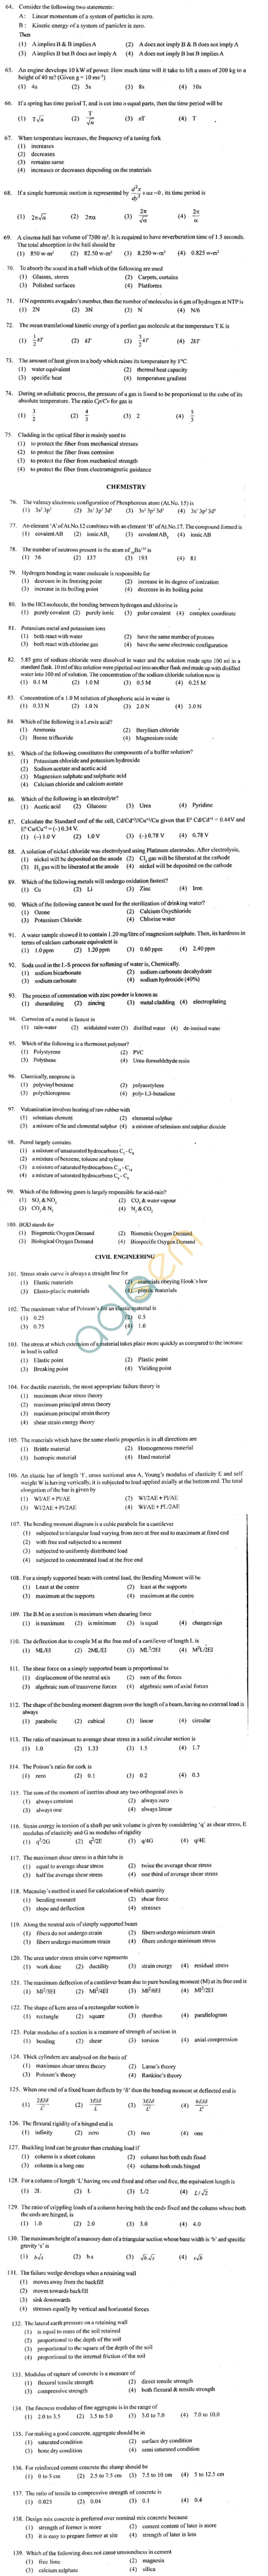 ECET 2012 Question Paper with Answers - Civil Engineering